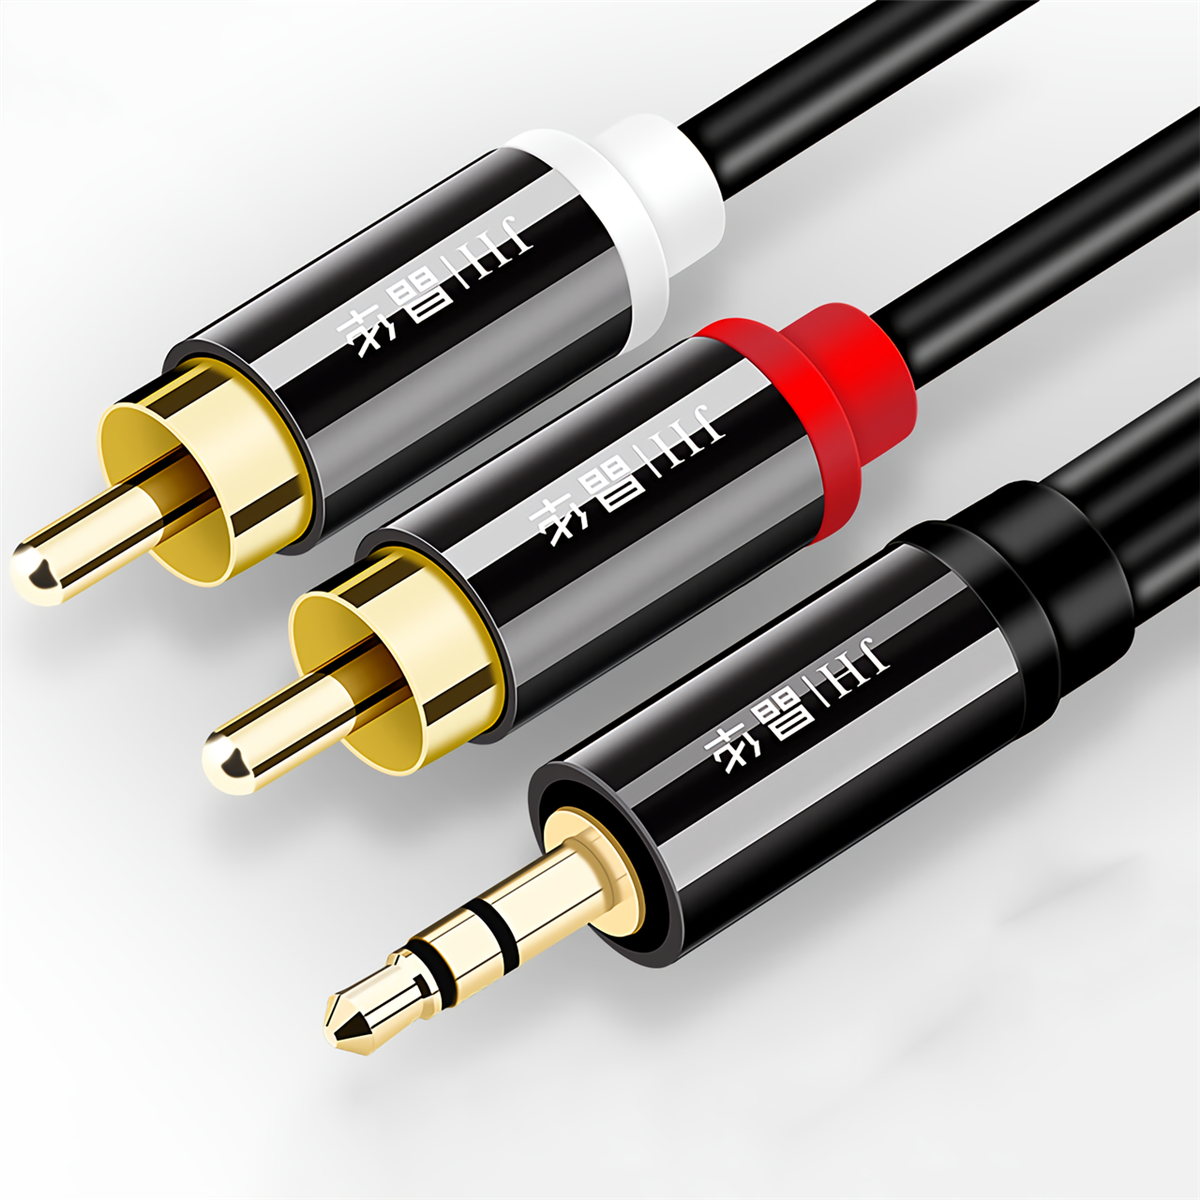 JINGHUA 3.5Mm to 2RCA Audio Cable 3.5Mm Hifi Stereo Jack RCA AUX Cable Y Splitter Cable for Mobile Phones Computers Amplifiers Home Theater Cable